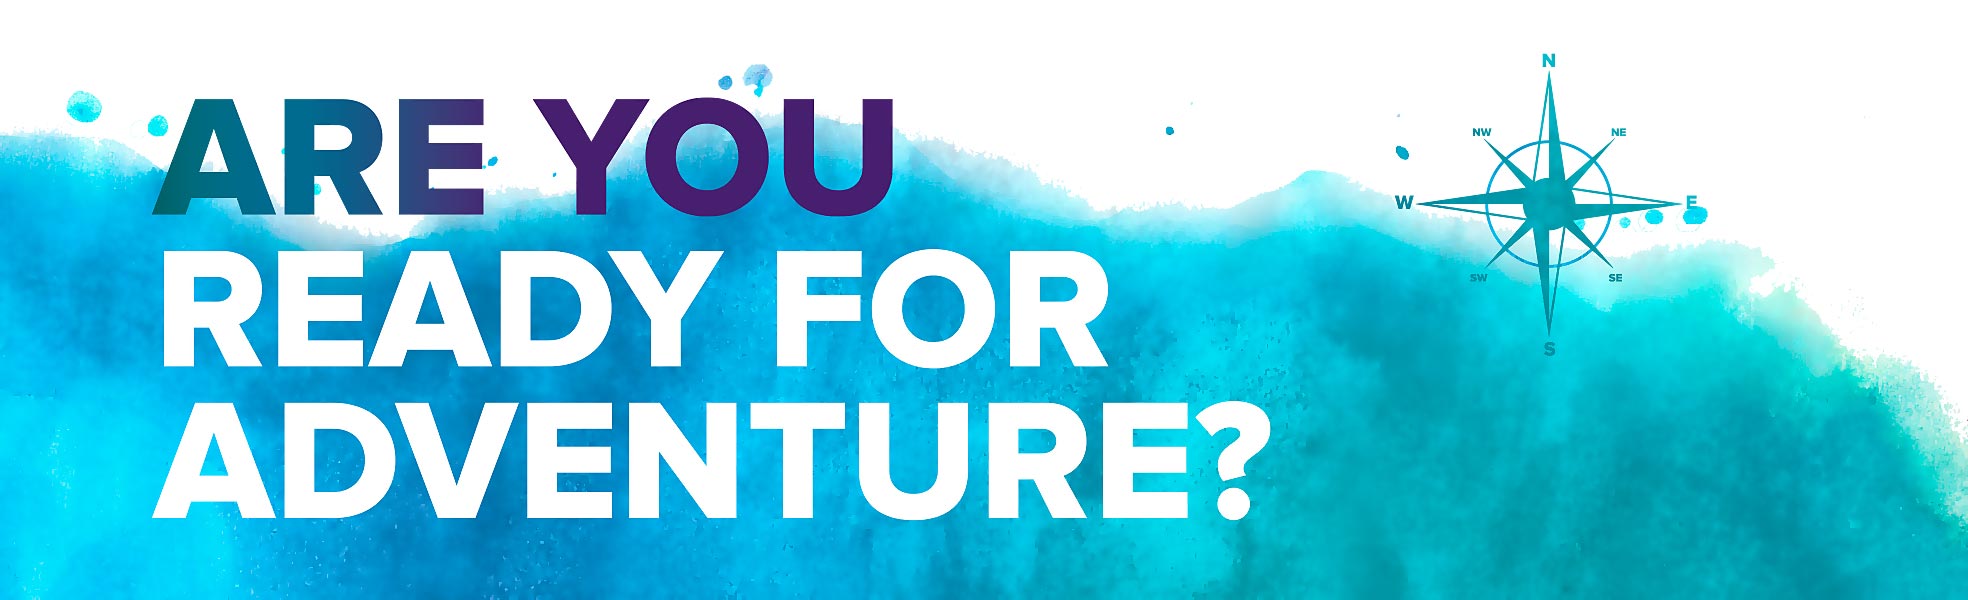 Are you ready for adventure?